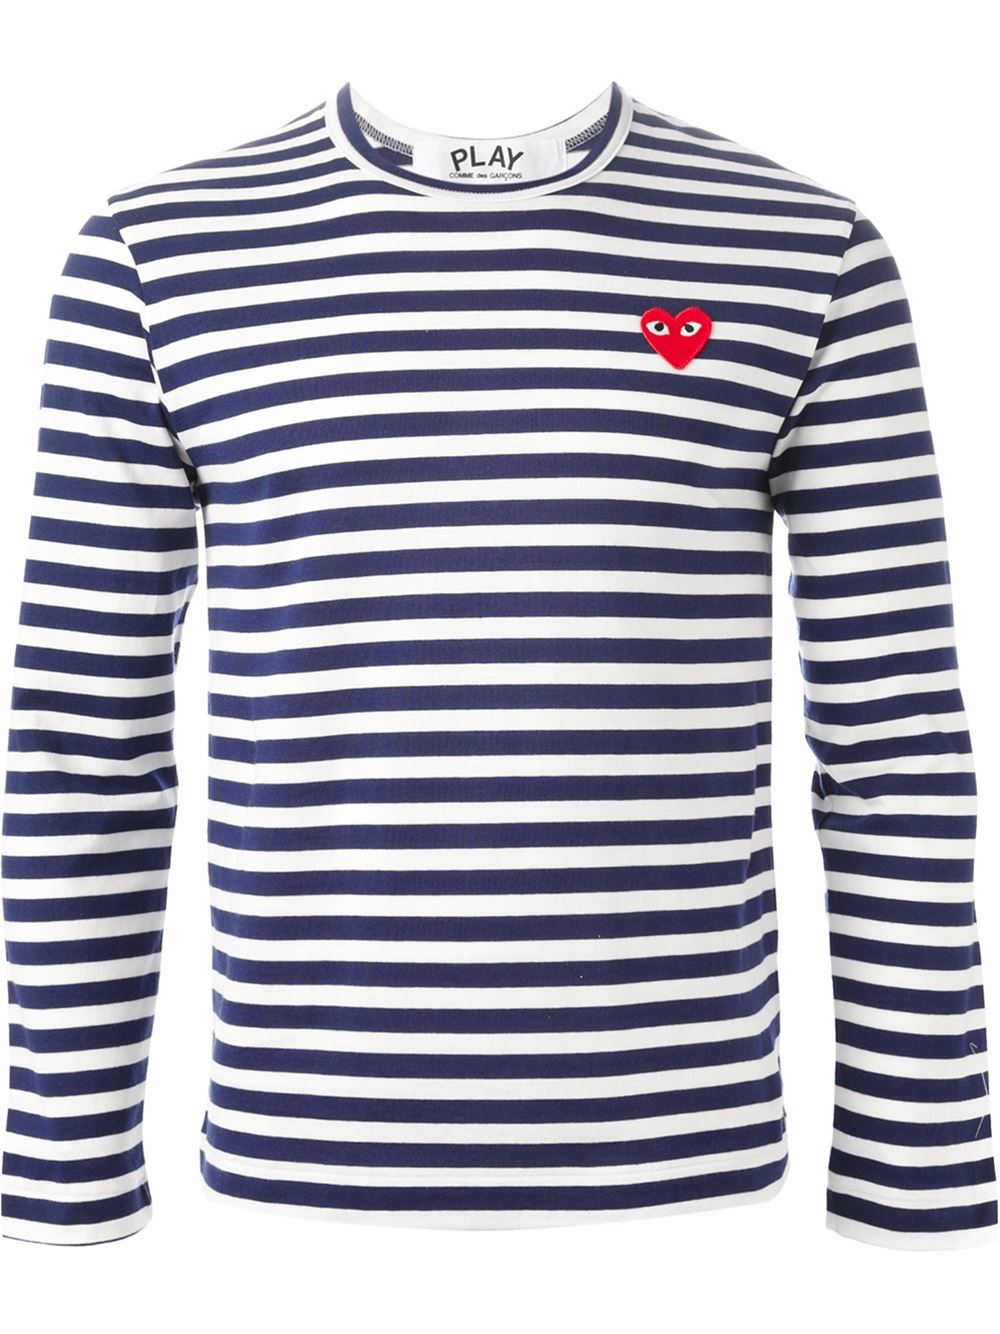 Lyst - Play Comme Des Garçons Embroidered Heart Striped T-shirt in Blue